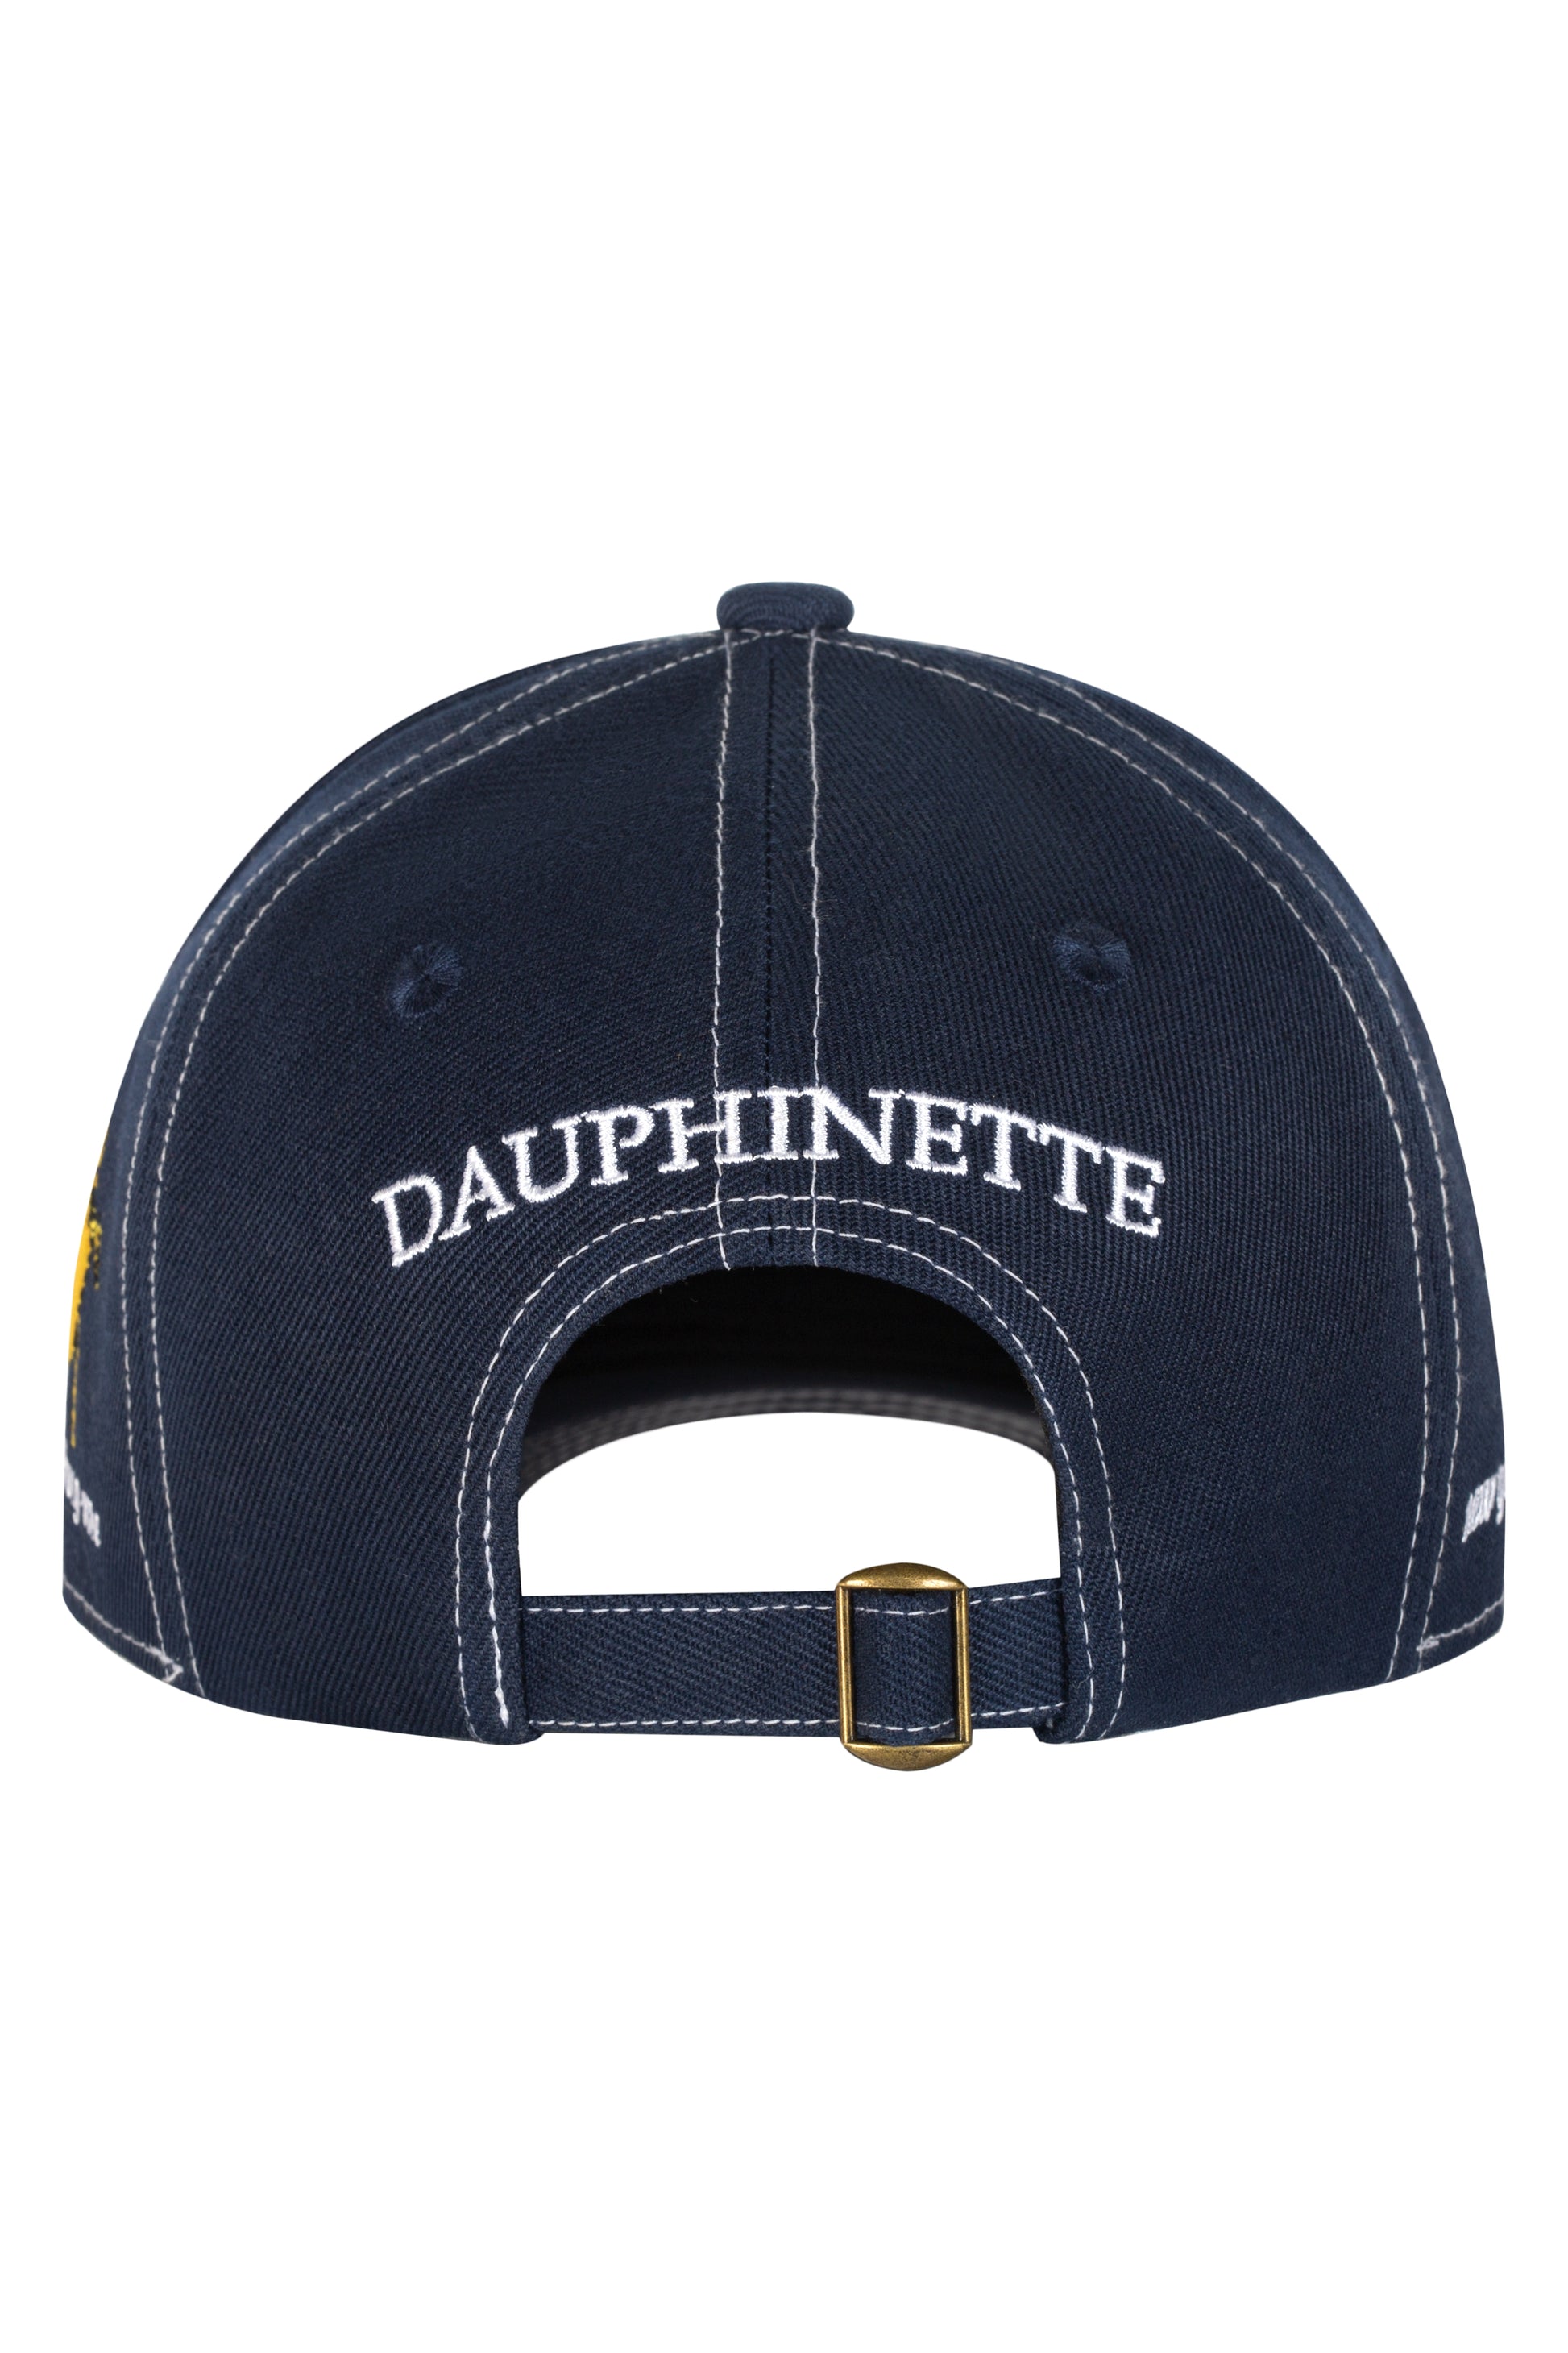 Back image of navy blue cap with "DAUPHINETTE" embroidered on it in white thread.